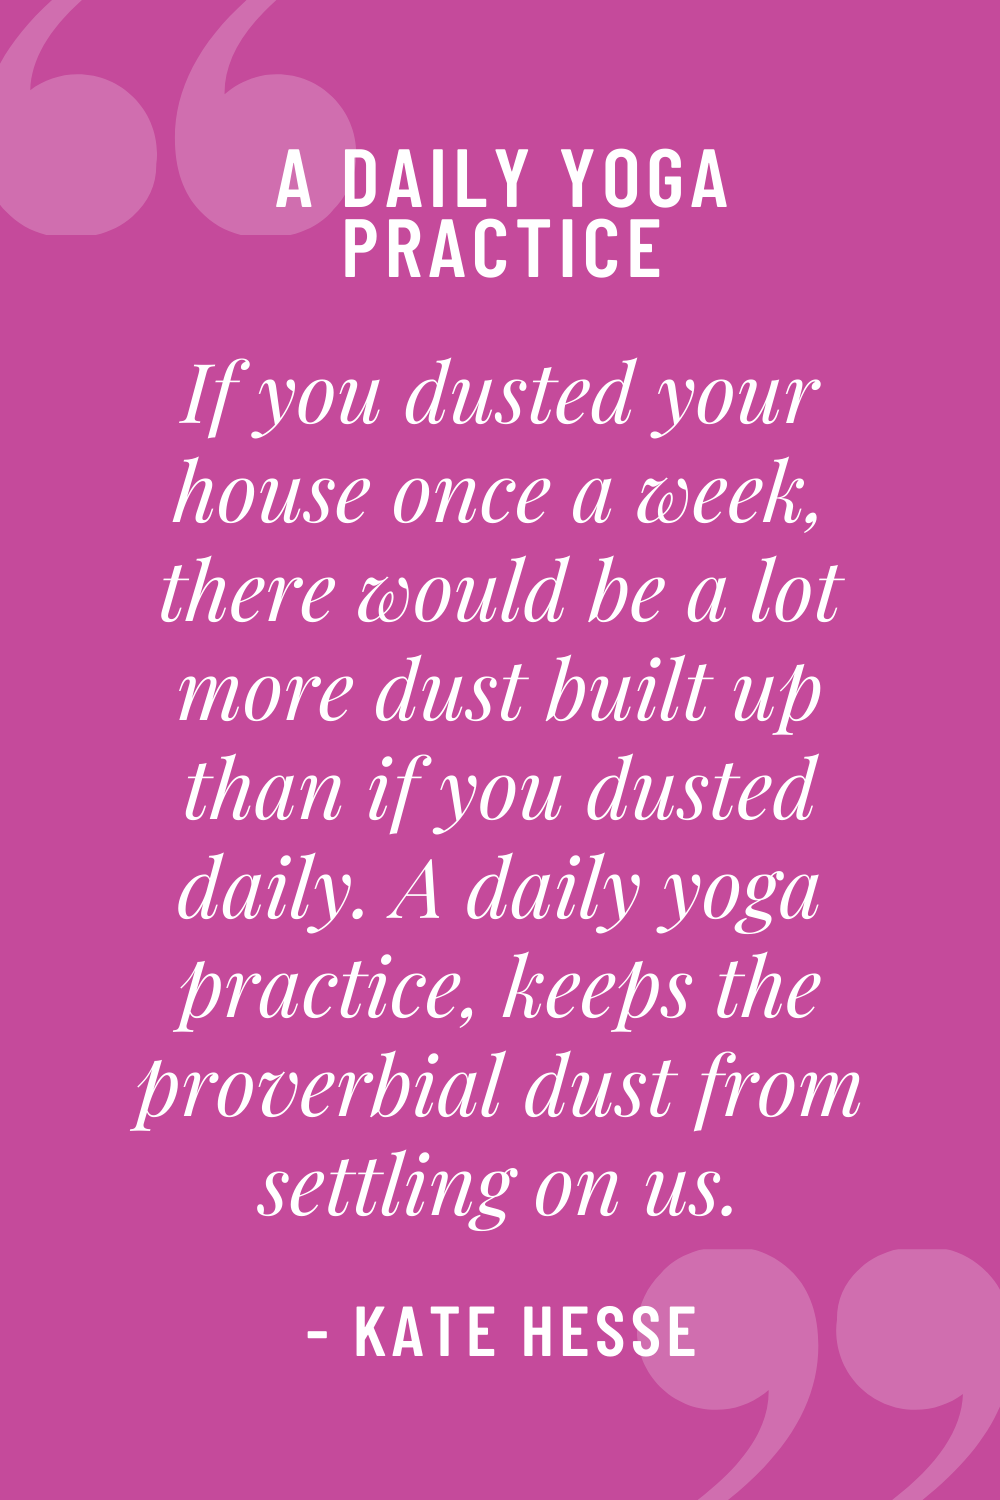 If you dusted your house once a week, there would be a lot more dust built up than if you dusted daily. A daily yoga practice keeps the proverbial dust from settling on us.